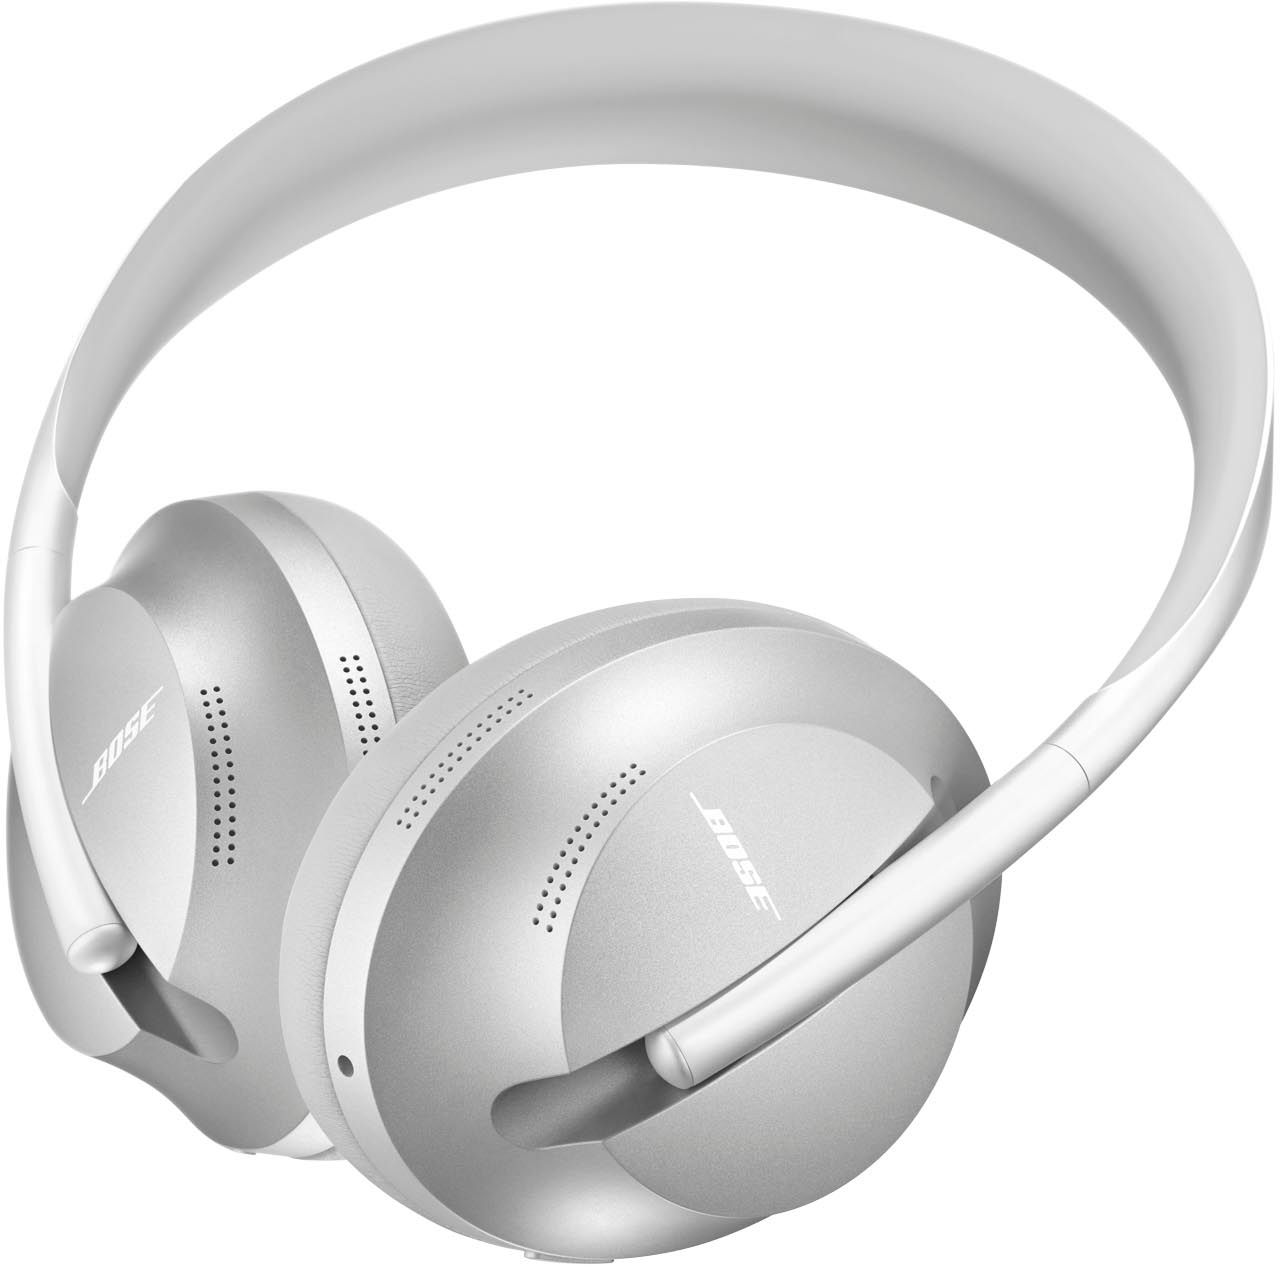 Angle View: Bose - Headphones 700 Wireless Noise Cancelling Over-the-Ear Headphones - Luxe Silver